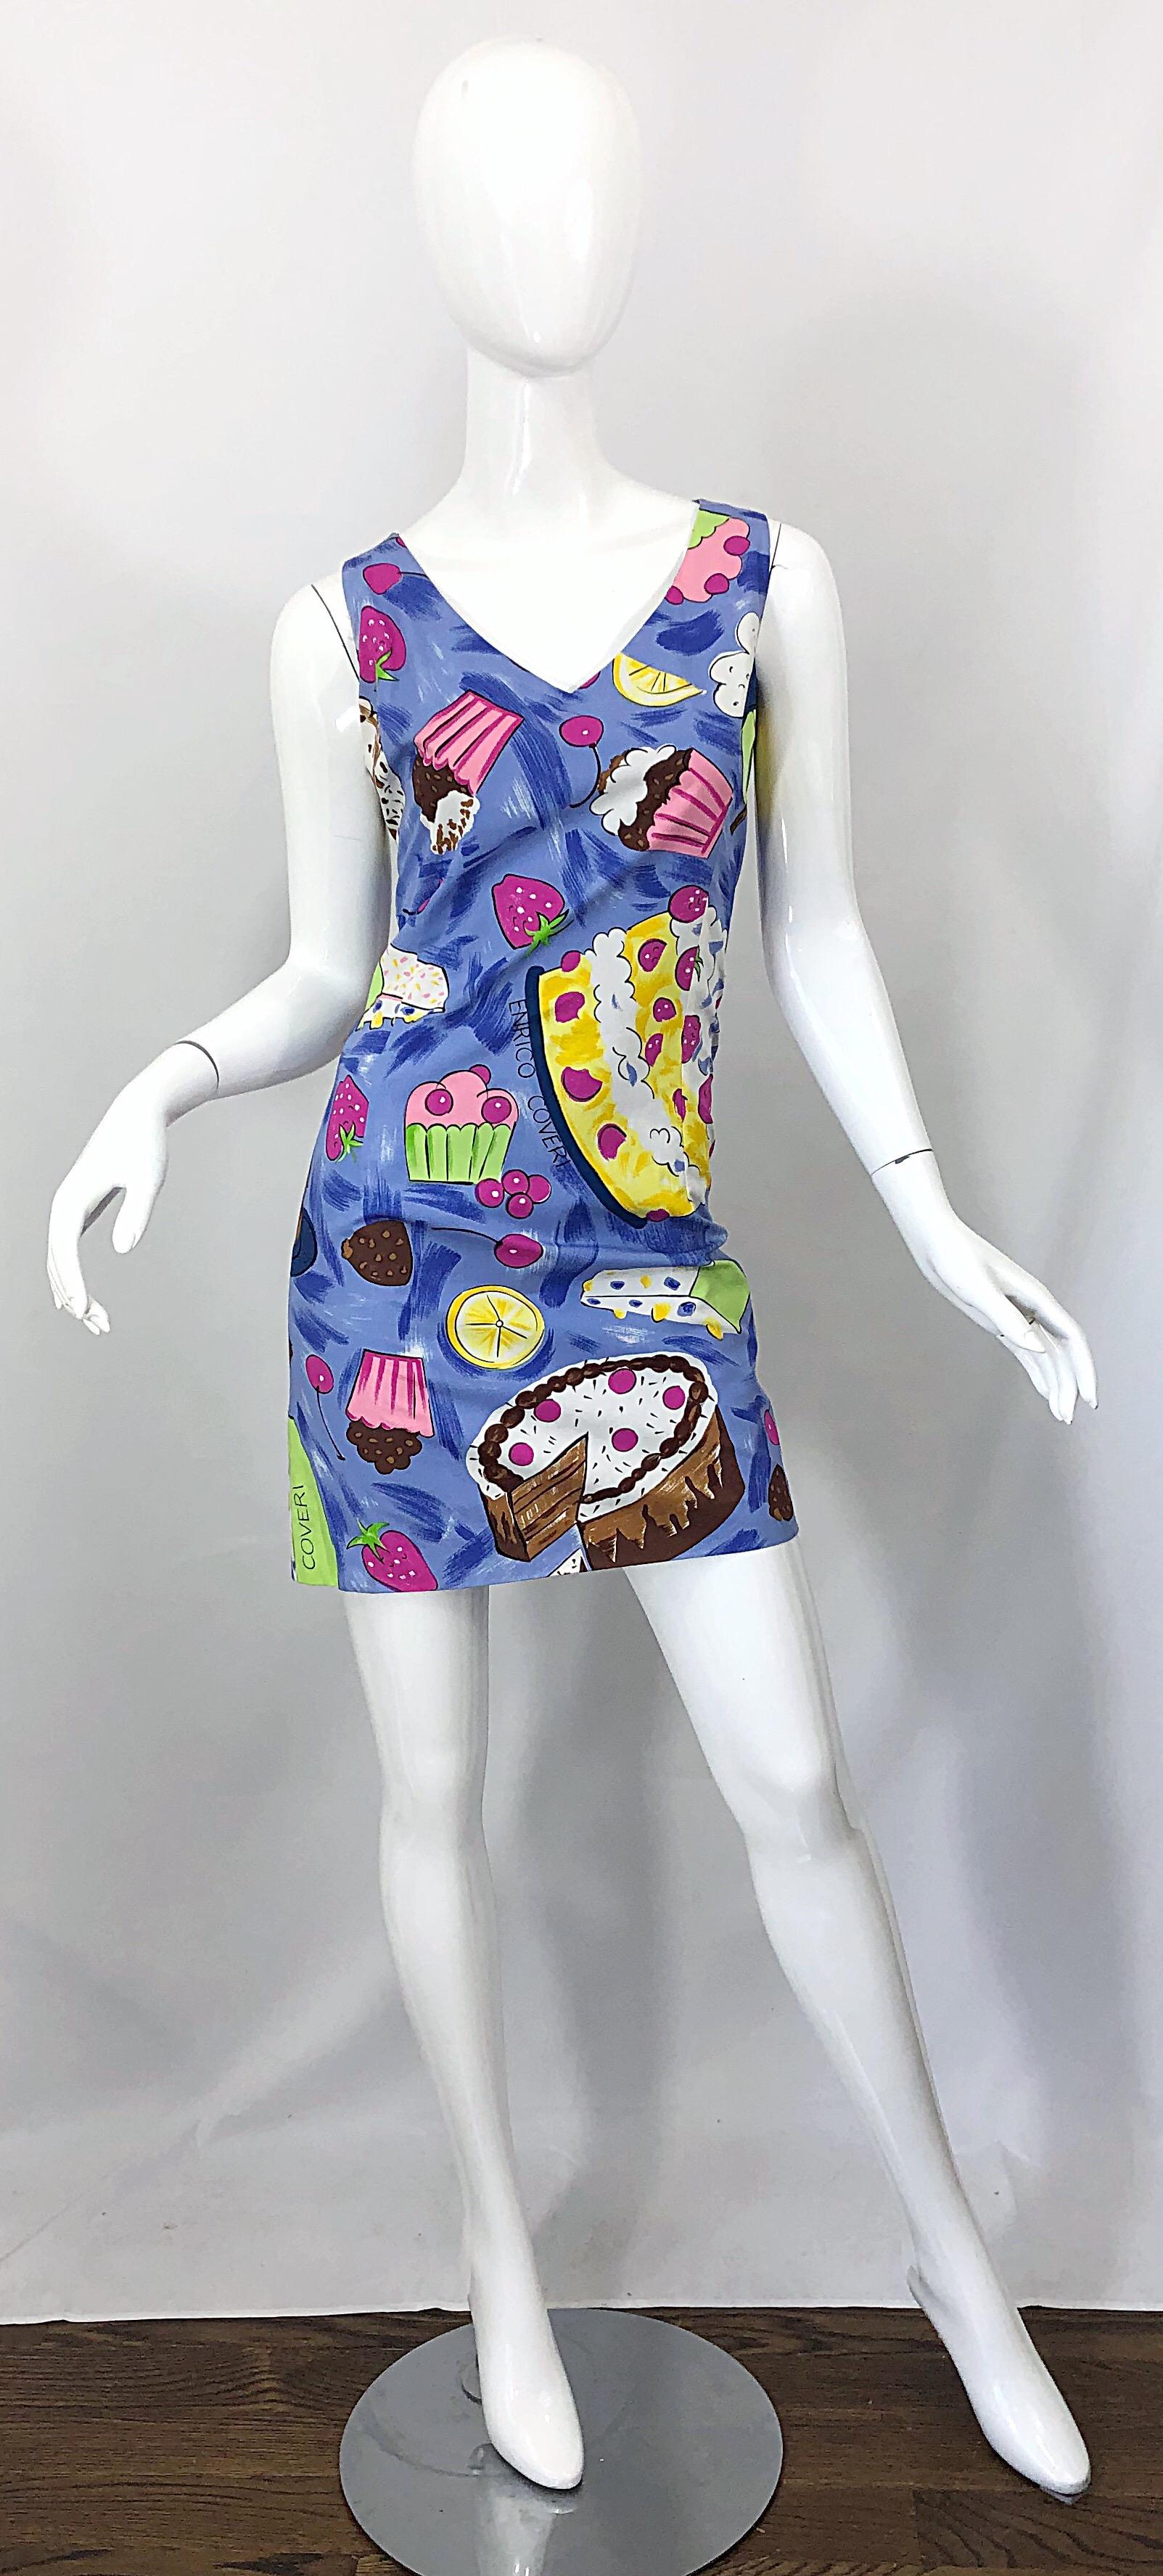 Amazing early 90s ENRICO COVERI novelty print cotton sleeveless dress! Now you CAN have your cake and eat it too! Set on a lavender backdrop, with vibrant colors of lime green, yellow, purple, pink, fuchsia, blue, brown and white throughout. Fun